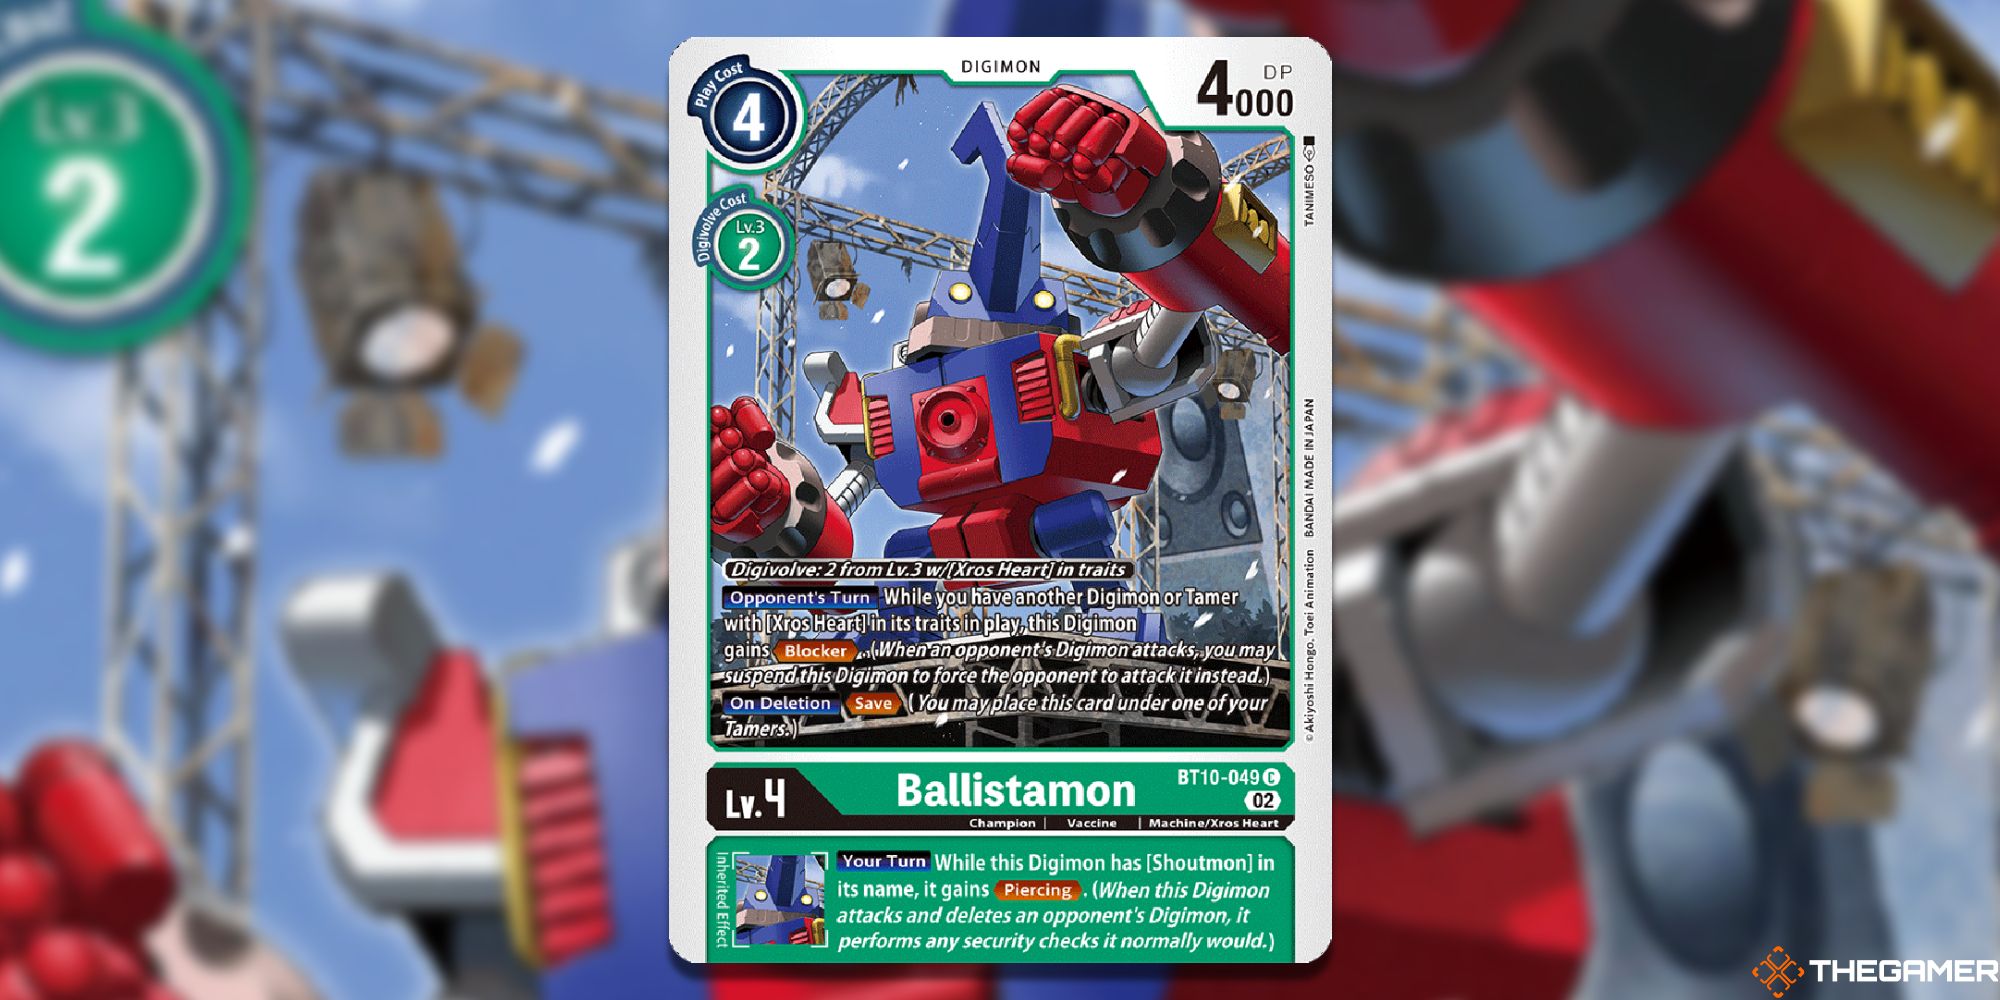 ballistamon image with blurred background digimon card game